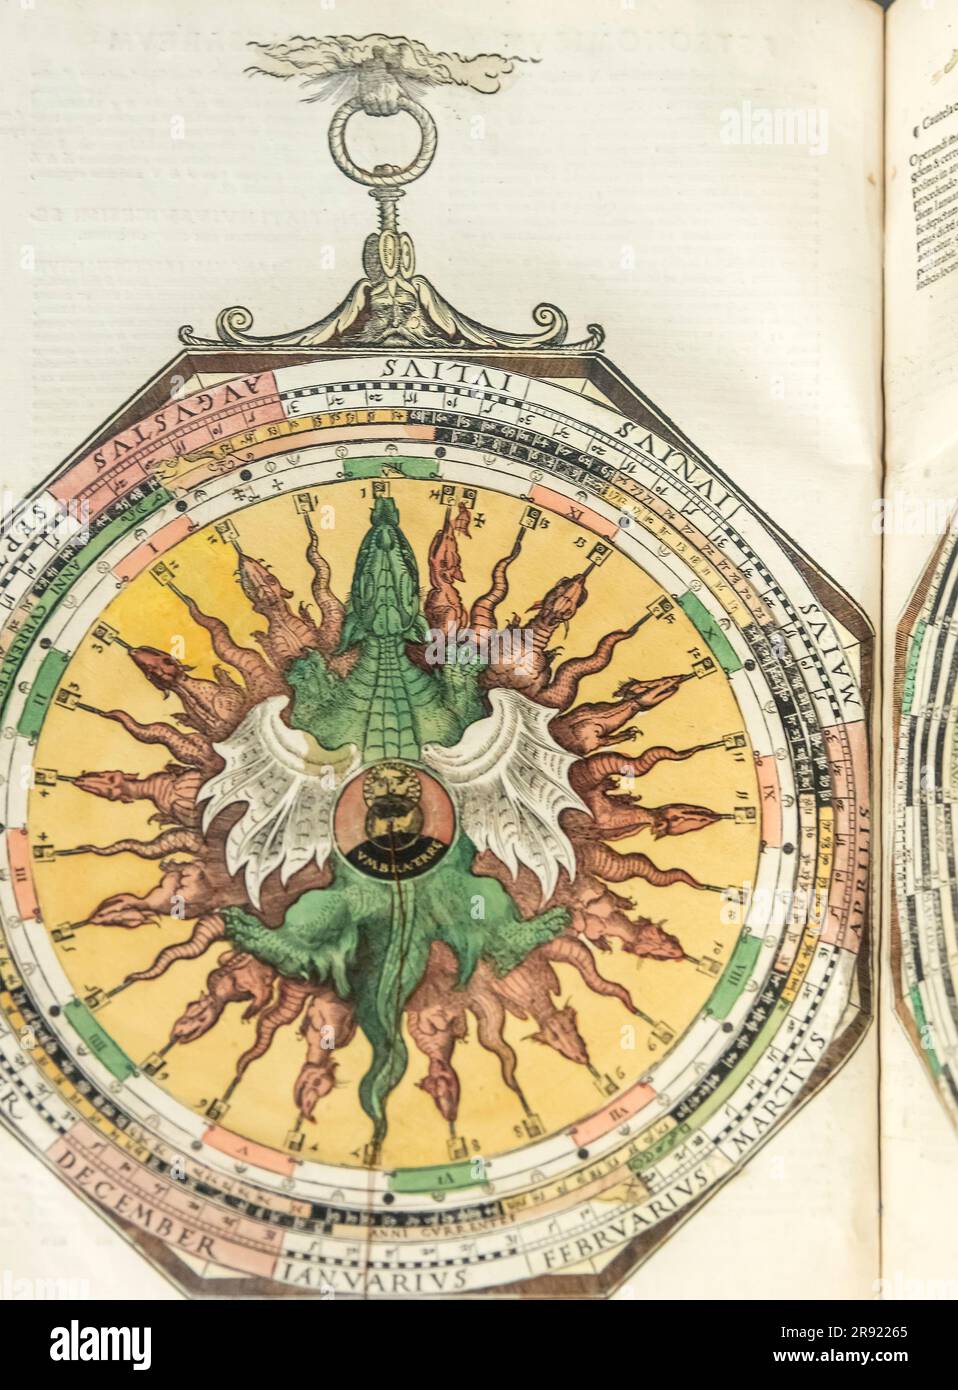 Astronomicum Caesareum (Treatise on Astronomy) by Petrus Apianus, Ingolstadt, Germany 1540 CE First Edition in the Louvre Museum, Abu Dhabi, UAE Stock Photo